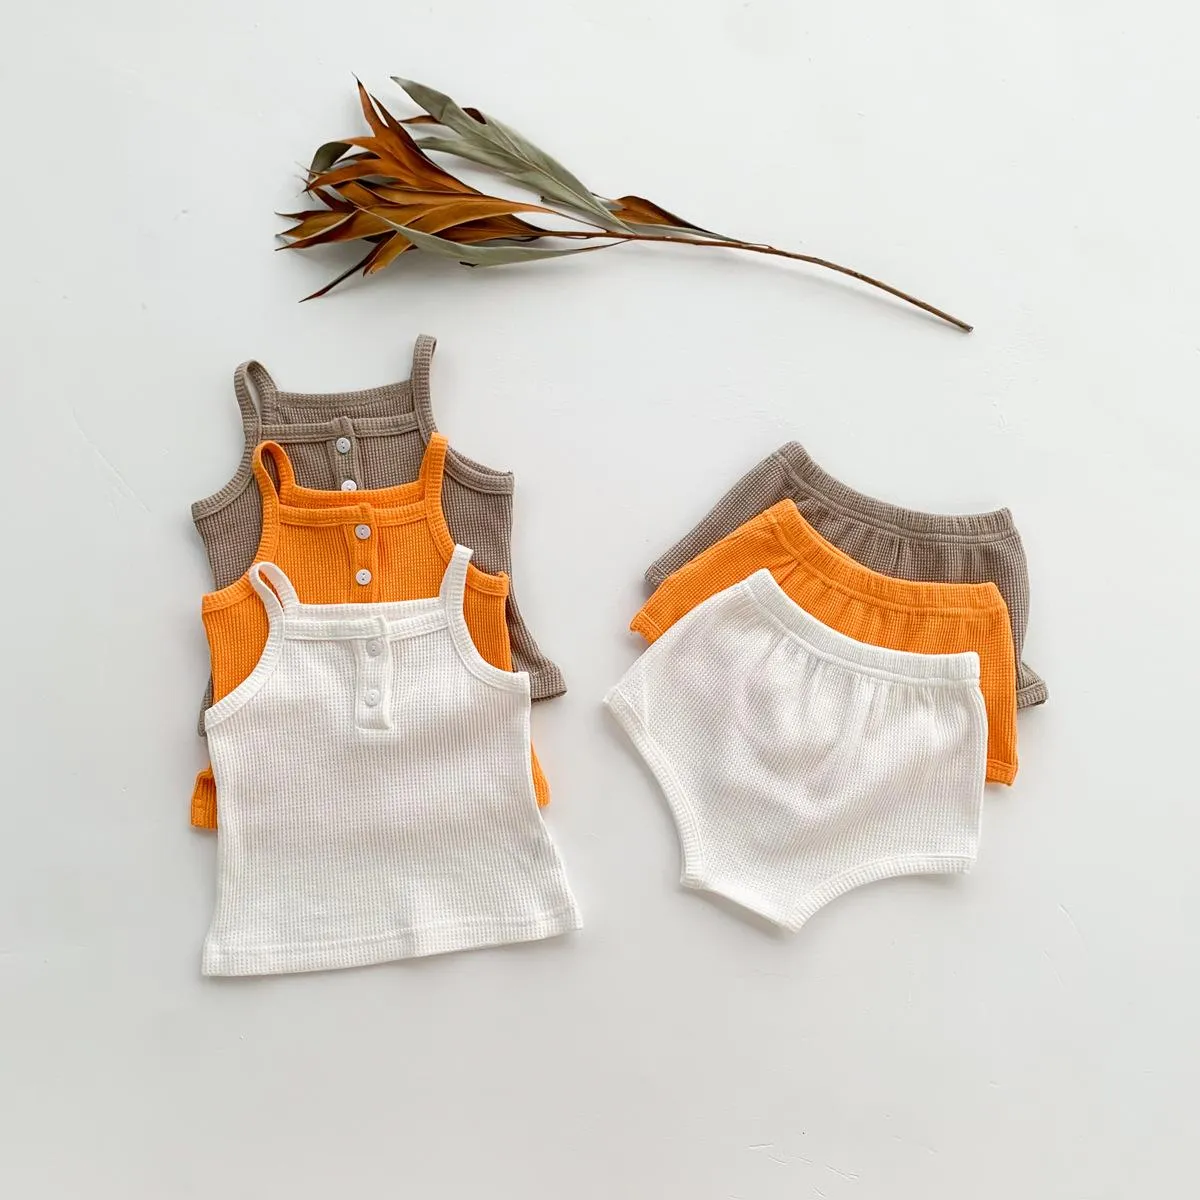 2022 Australia Korean US INS Toddler Clothing Sets Waffle Cotton Pretty Soft Short Sleeve Tanks with Hot Shorts Newborn Outfits